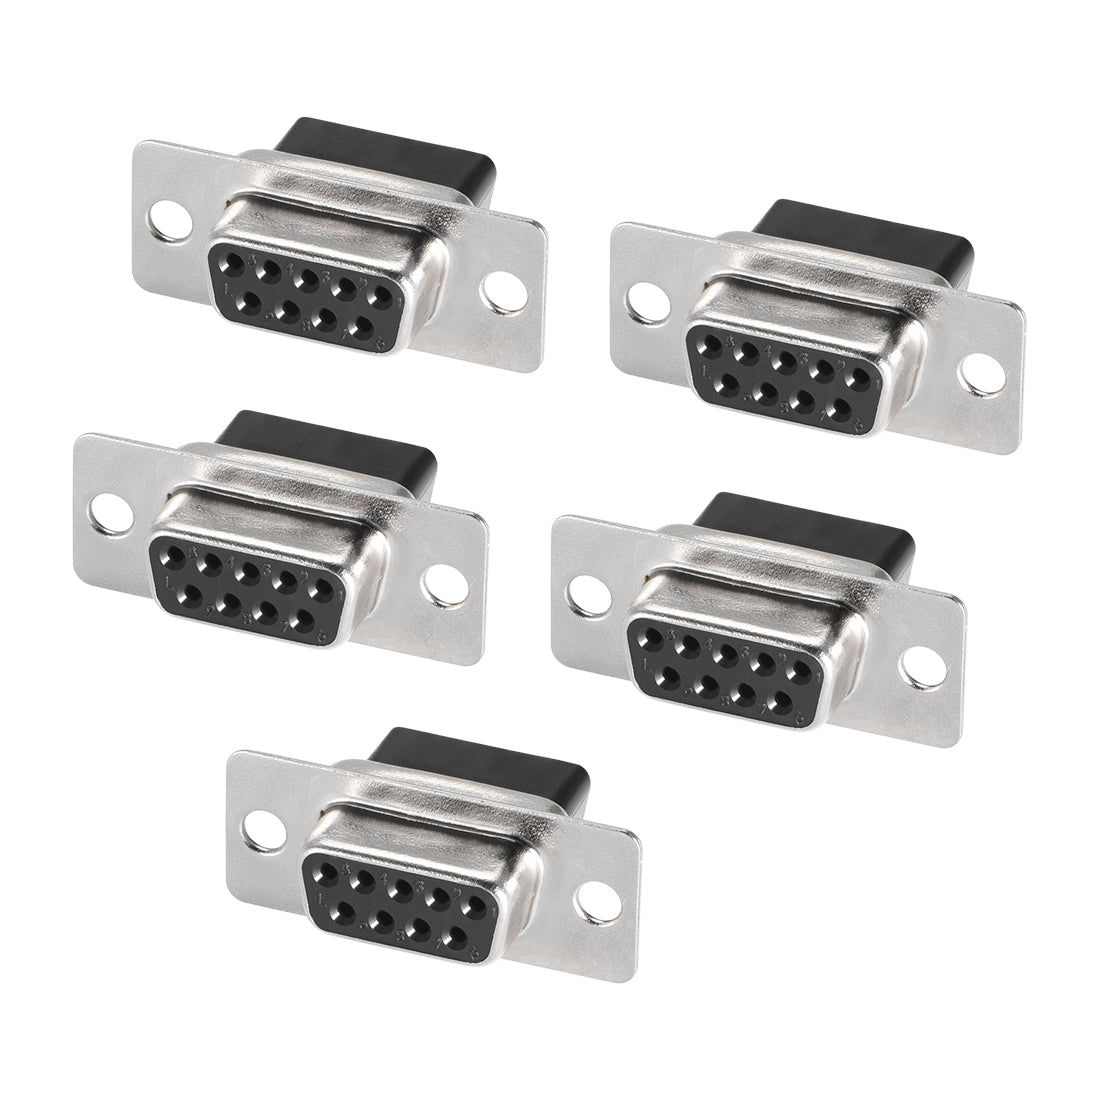 uxcell Uxcell D-sub Connector Female Socket 9-position 2-row Crimp Style Port Terminal Breakout for Mechanical Equipment Black 5pcs